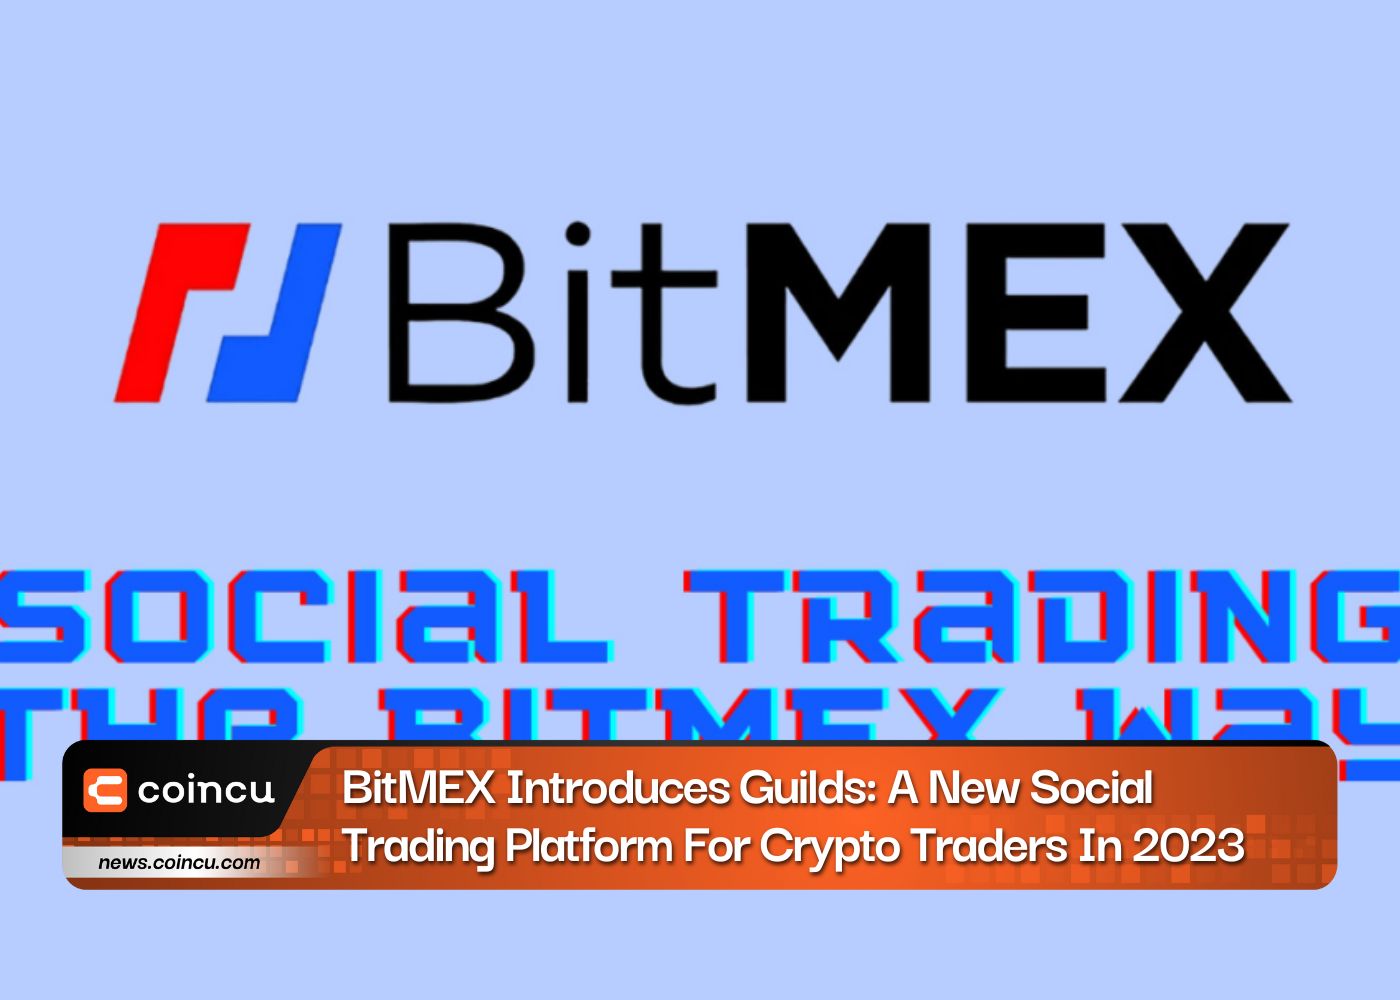 BitMEX Introduces Guilds: A New Social Trading Platform For Crypto Traders In 2023